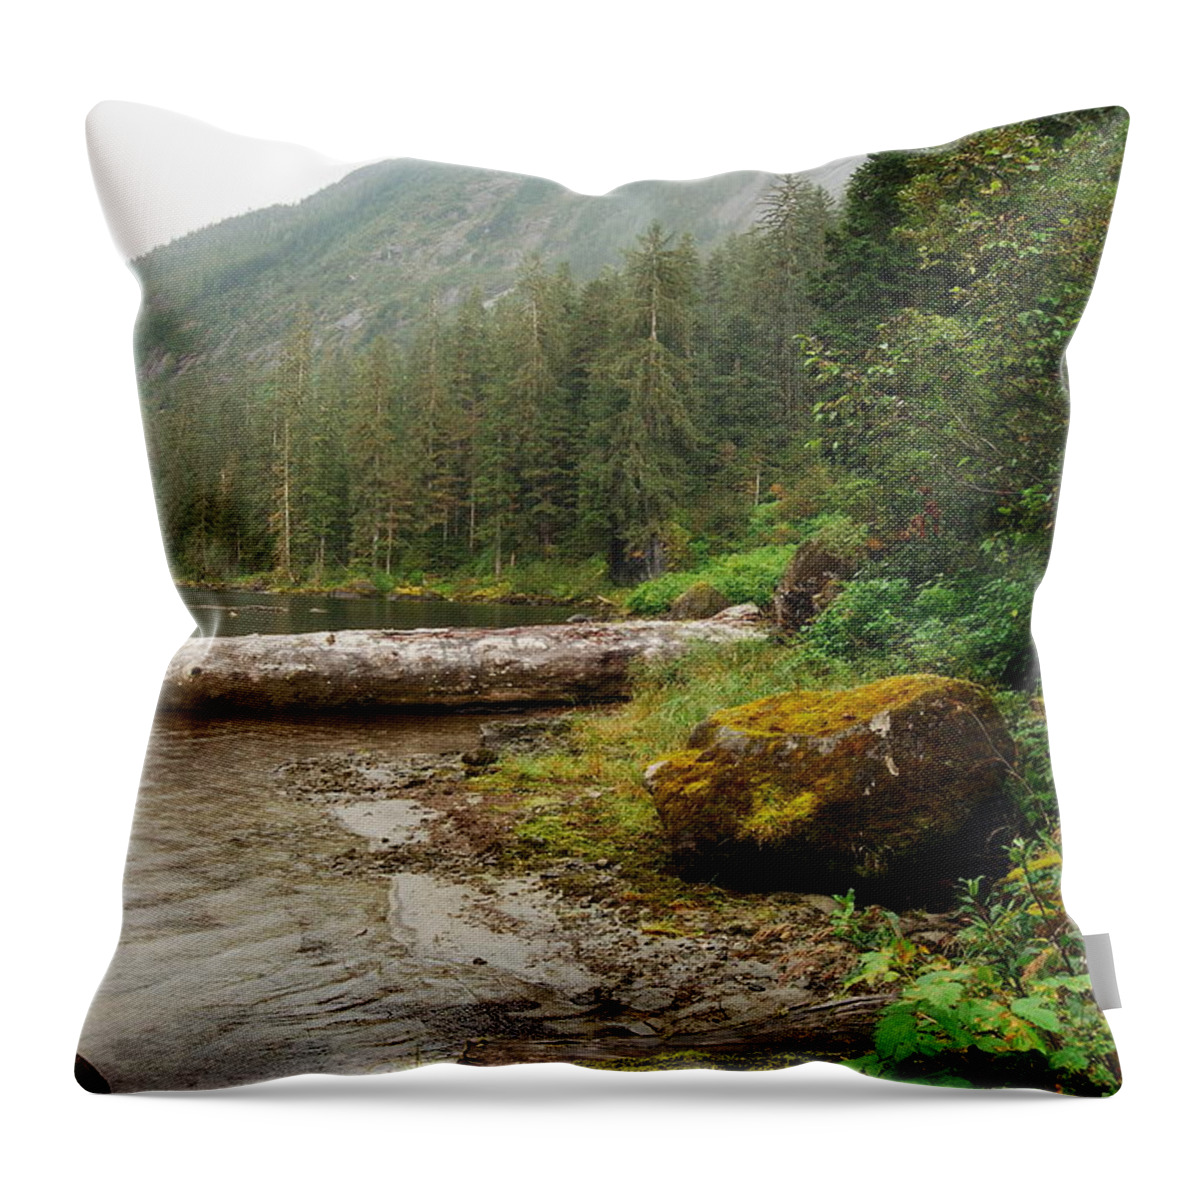 Alaska Throw Pillow featuring the photograph Ketchikan's Misty Fjord by Michael Peychich